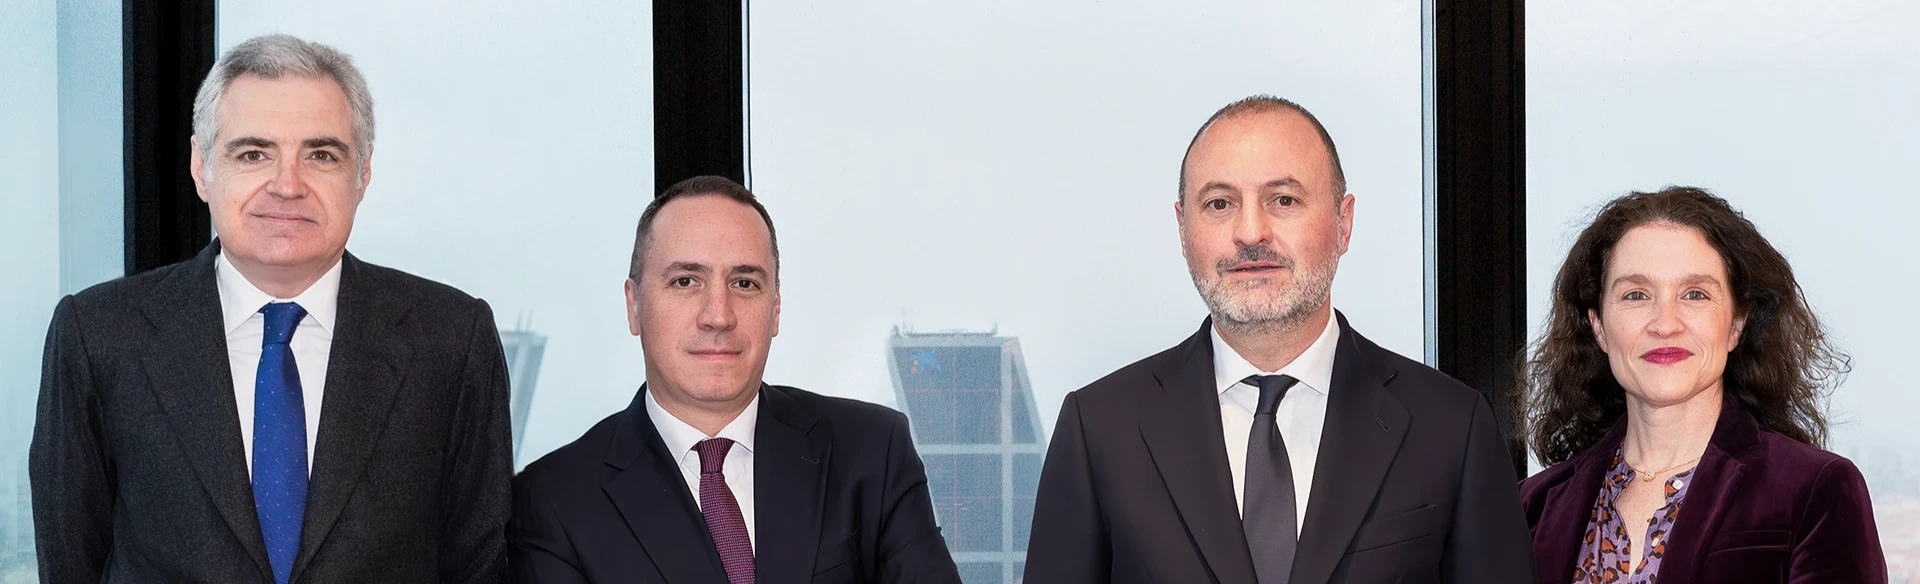 Pérez-Llorca expands its management structure with the appointment of Julio Lujambio as Executive Partner and Iván Delgado as International Executive Partner